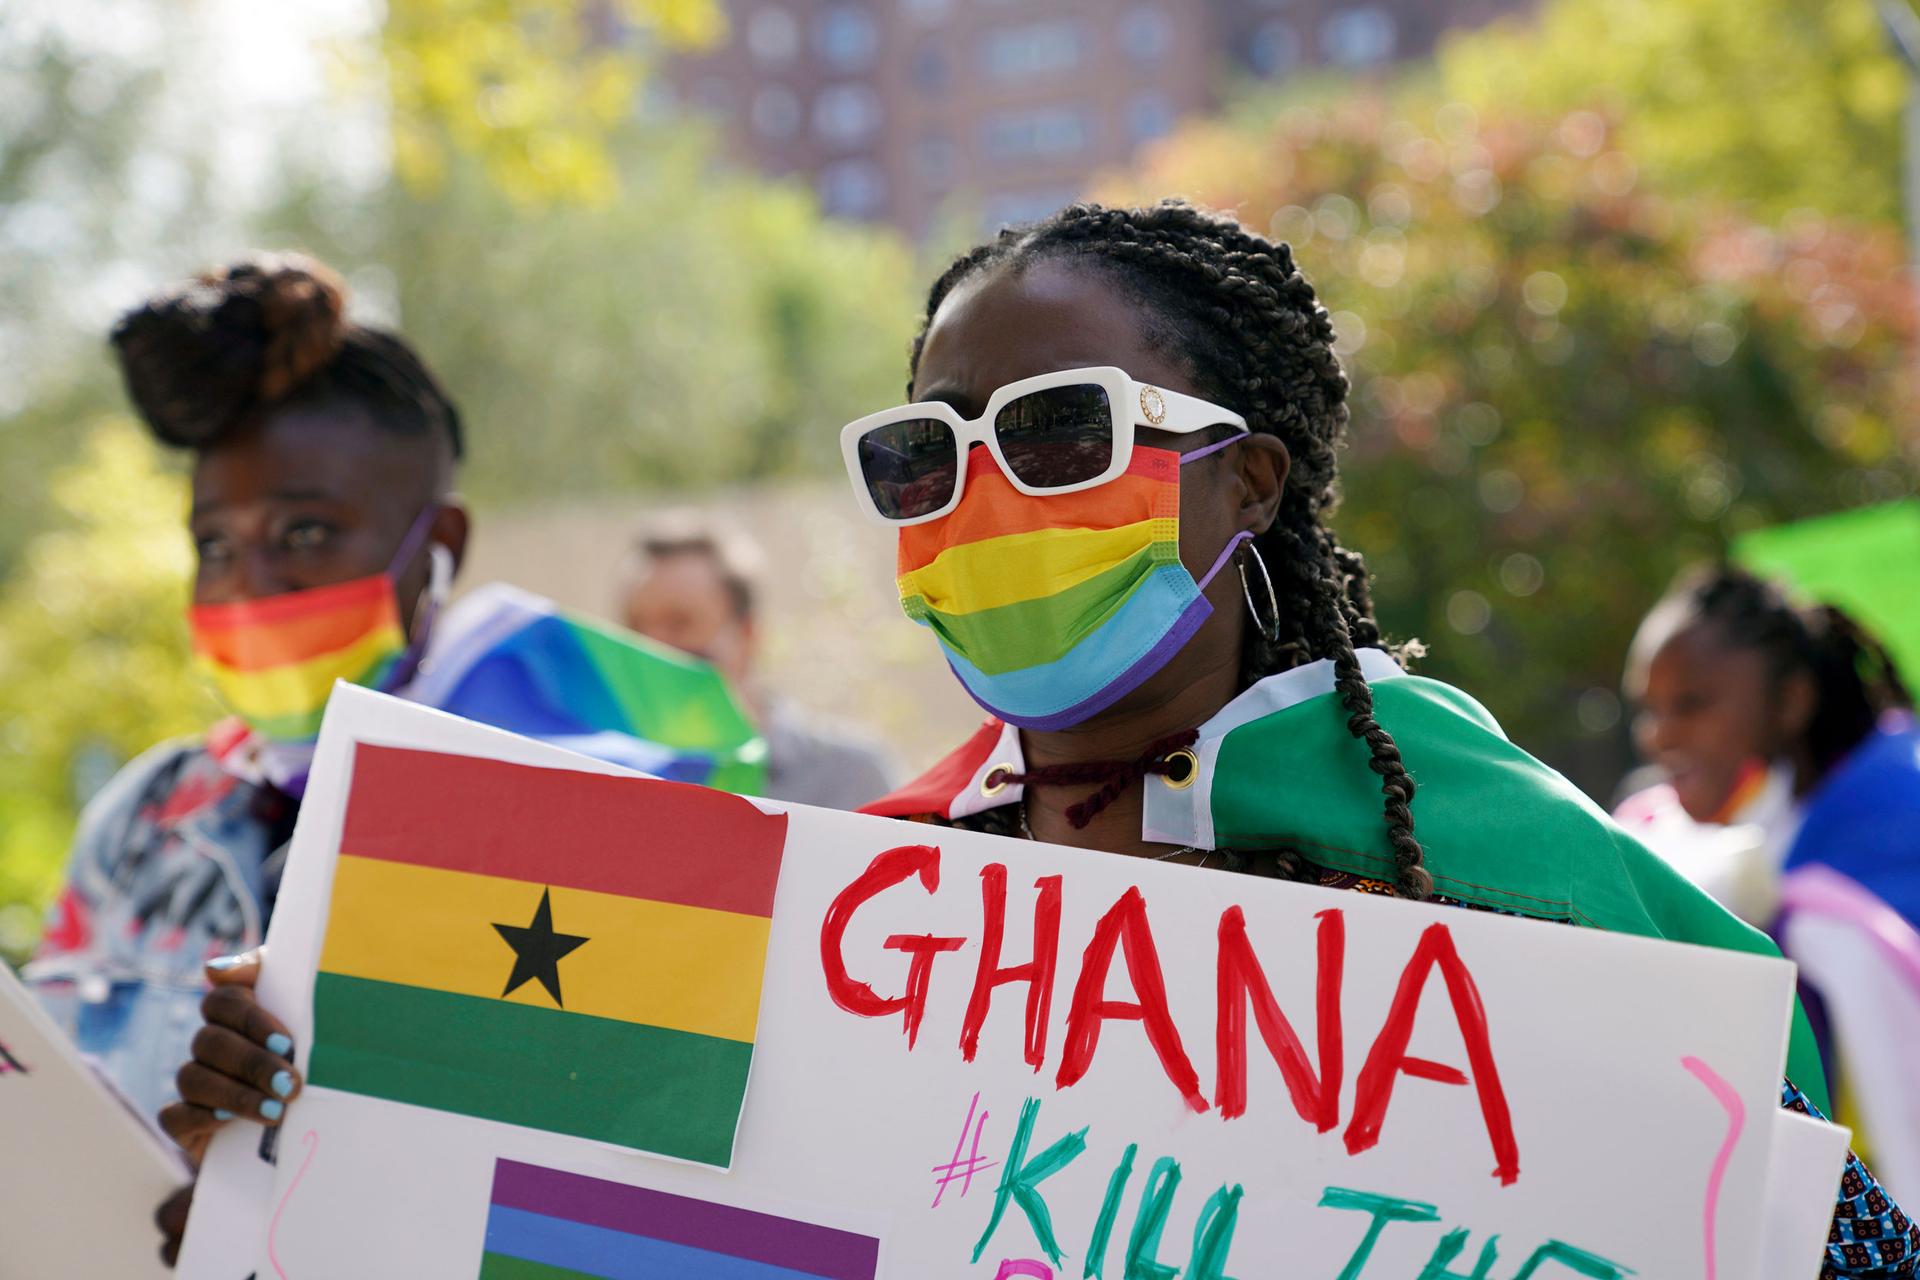 Wilhemina Nyarko attends a rally against a controversial bill being proposed in Ghana's parliament that would make identifying as LGBTQIA or an ally a criminal offense punishable by up to 10 years in prison, in the Harlem neighborhood of New York on Monda